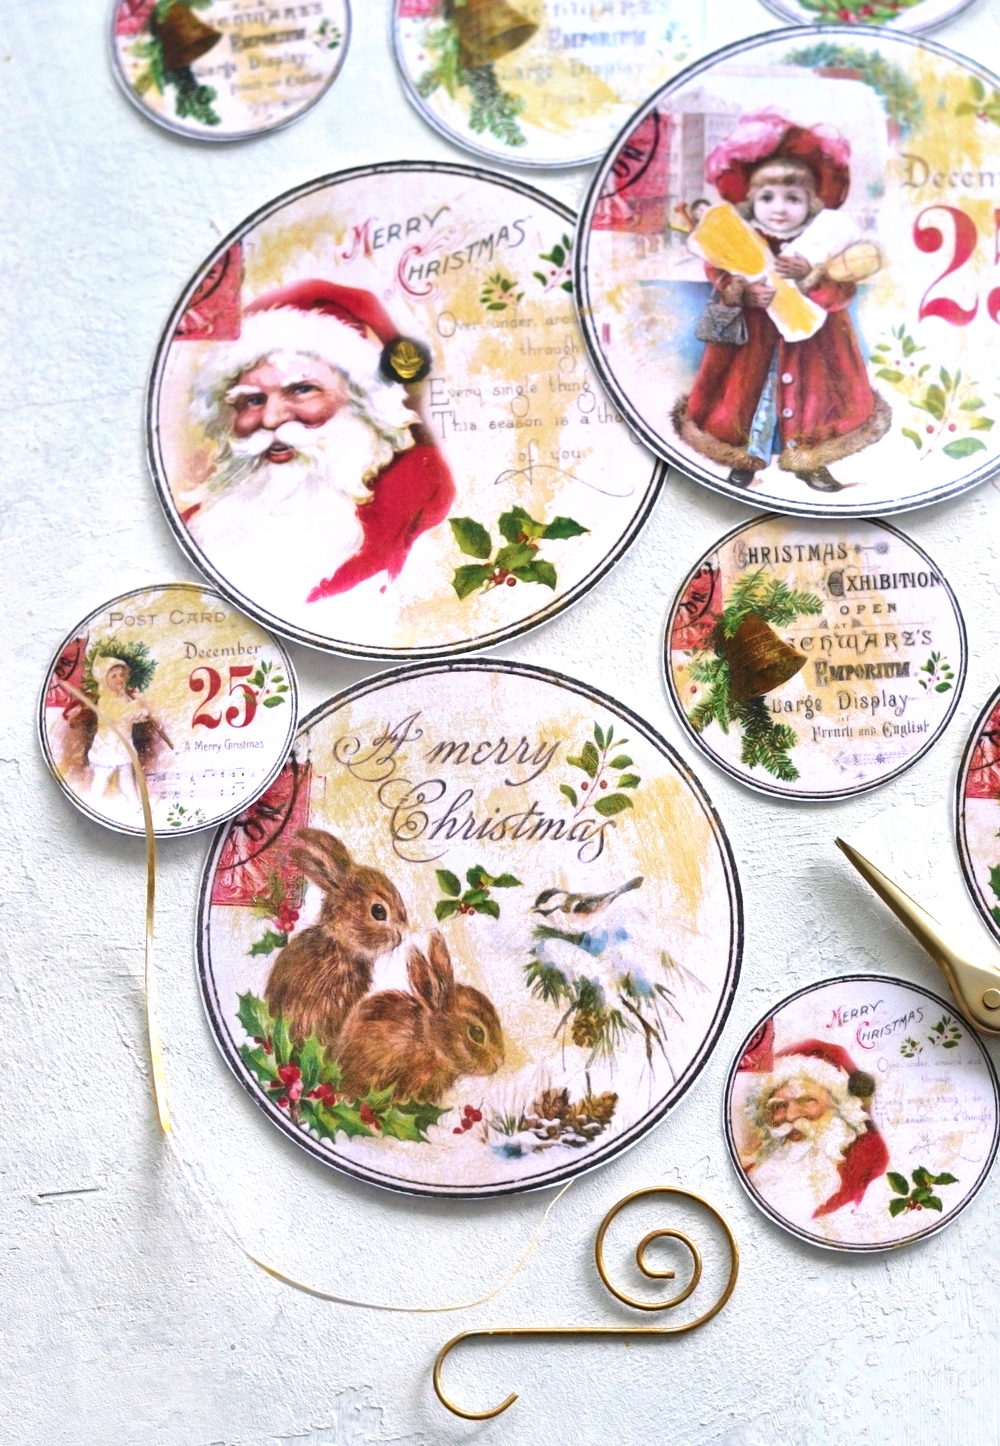 Cupcake Toppers 2.5 inch Circles of Vintage Christmas Books for Tags INSTANT DOWNLOAD Ornaments Scrapbooking DIY Printables